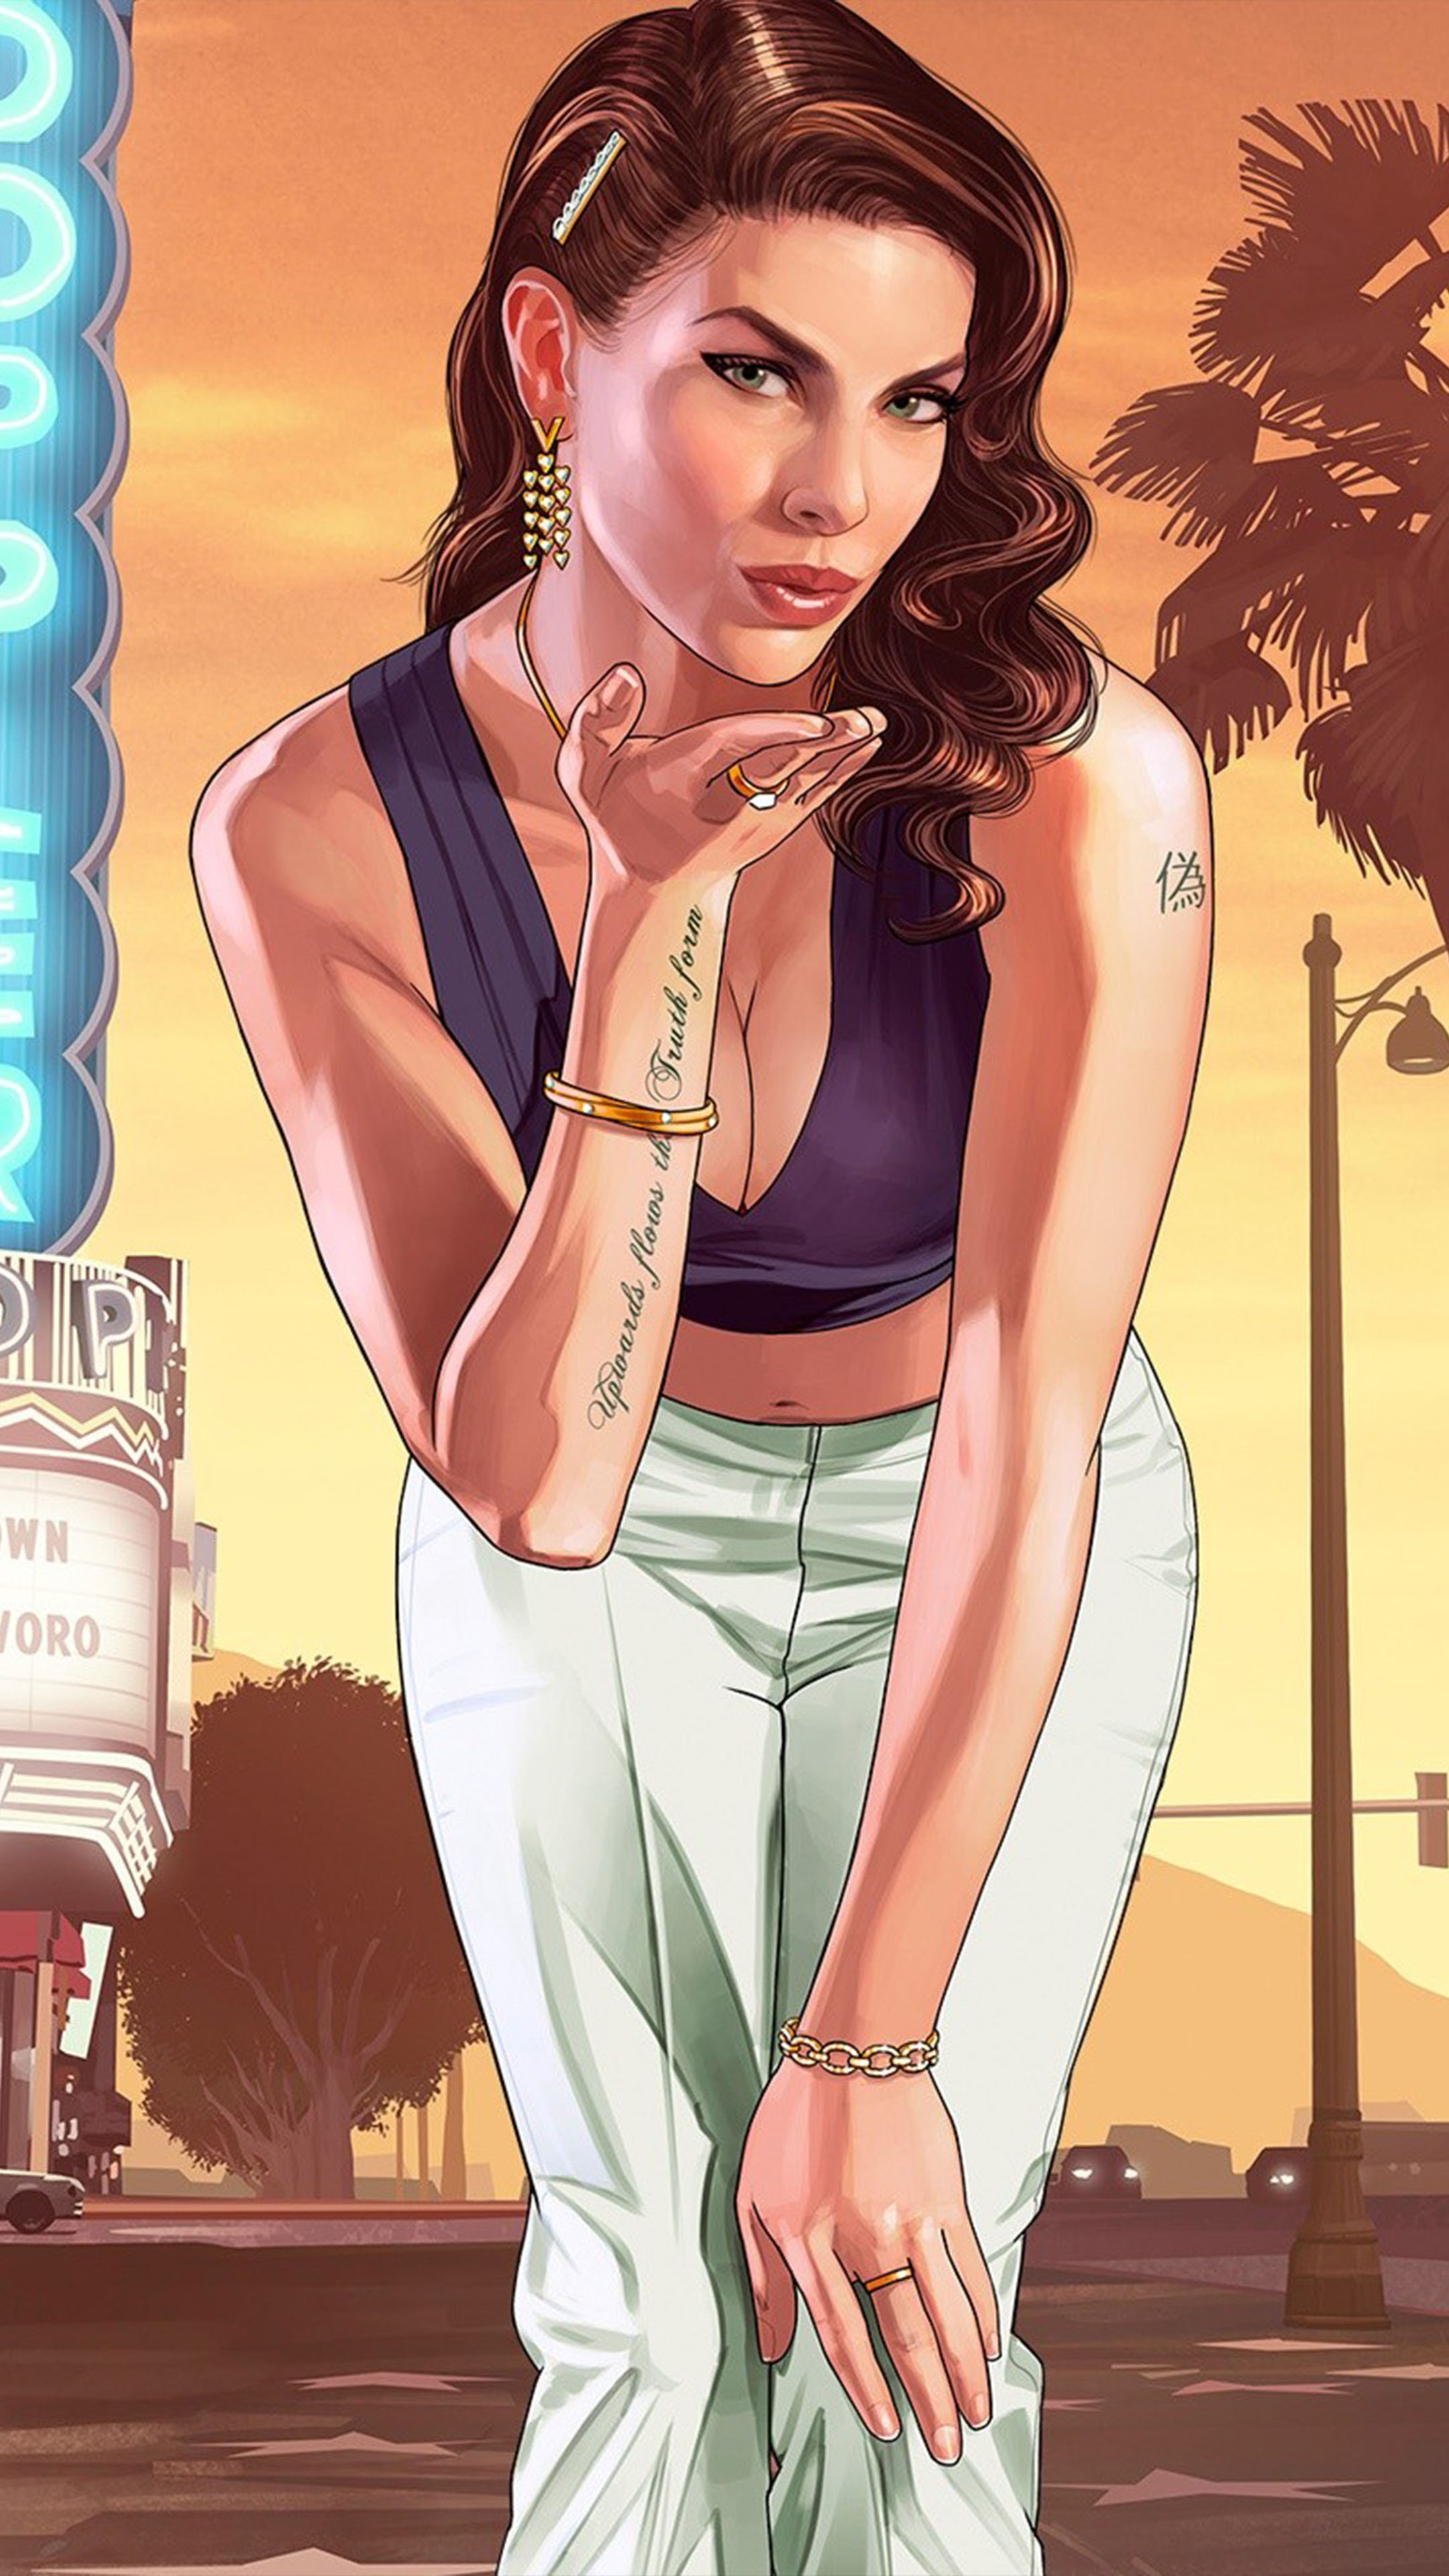 GTA lady, Bold and fearless, Strong female character, Deadly skills, 2160x3840 4K Handy